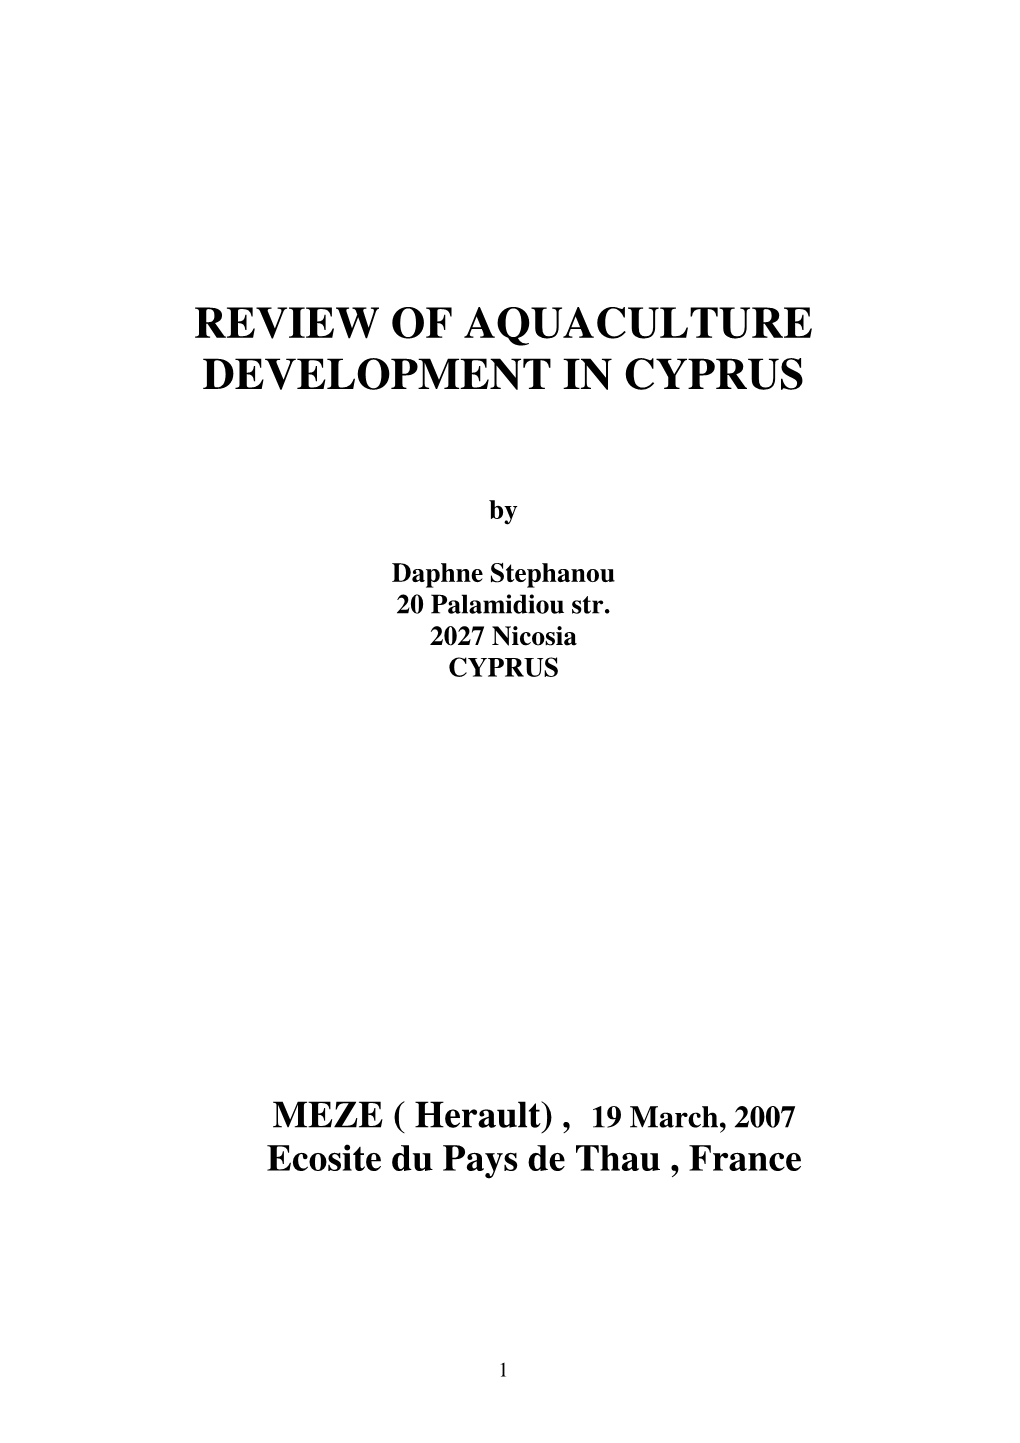 Review of Aquaculture Development in Cyprus